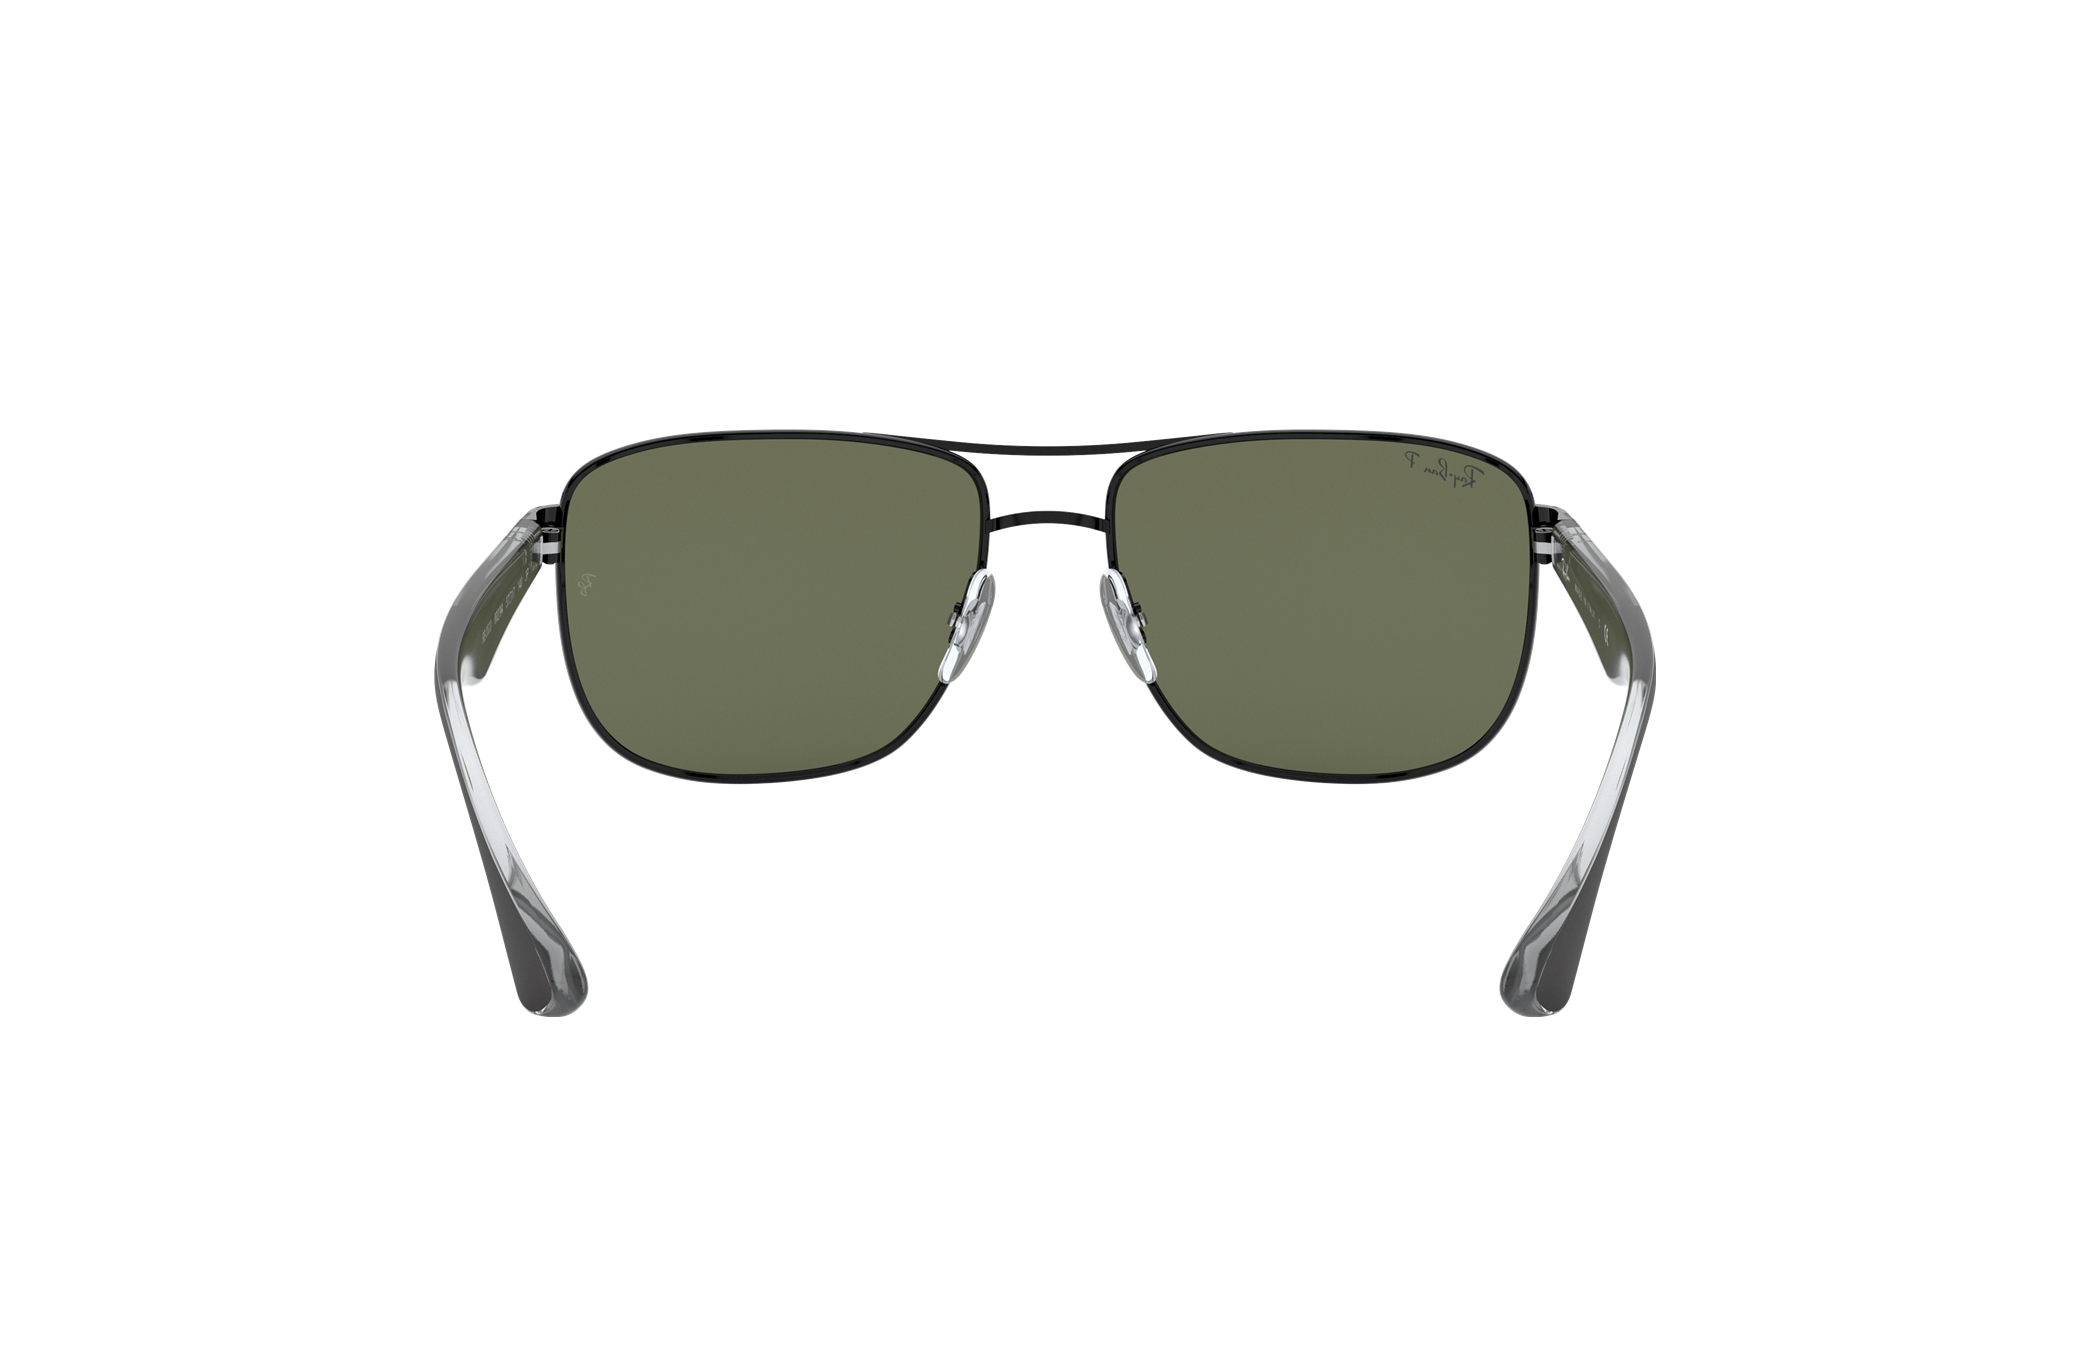 RB3533 Sunglasses in Black and G-15 Green - RB3533 | Ray-Ban® US